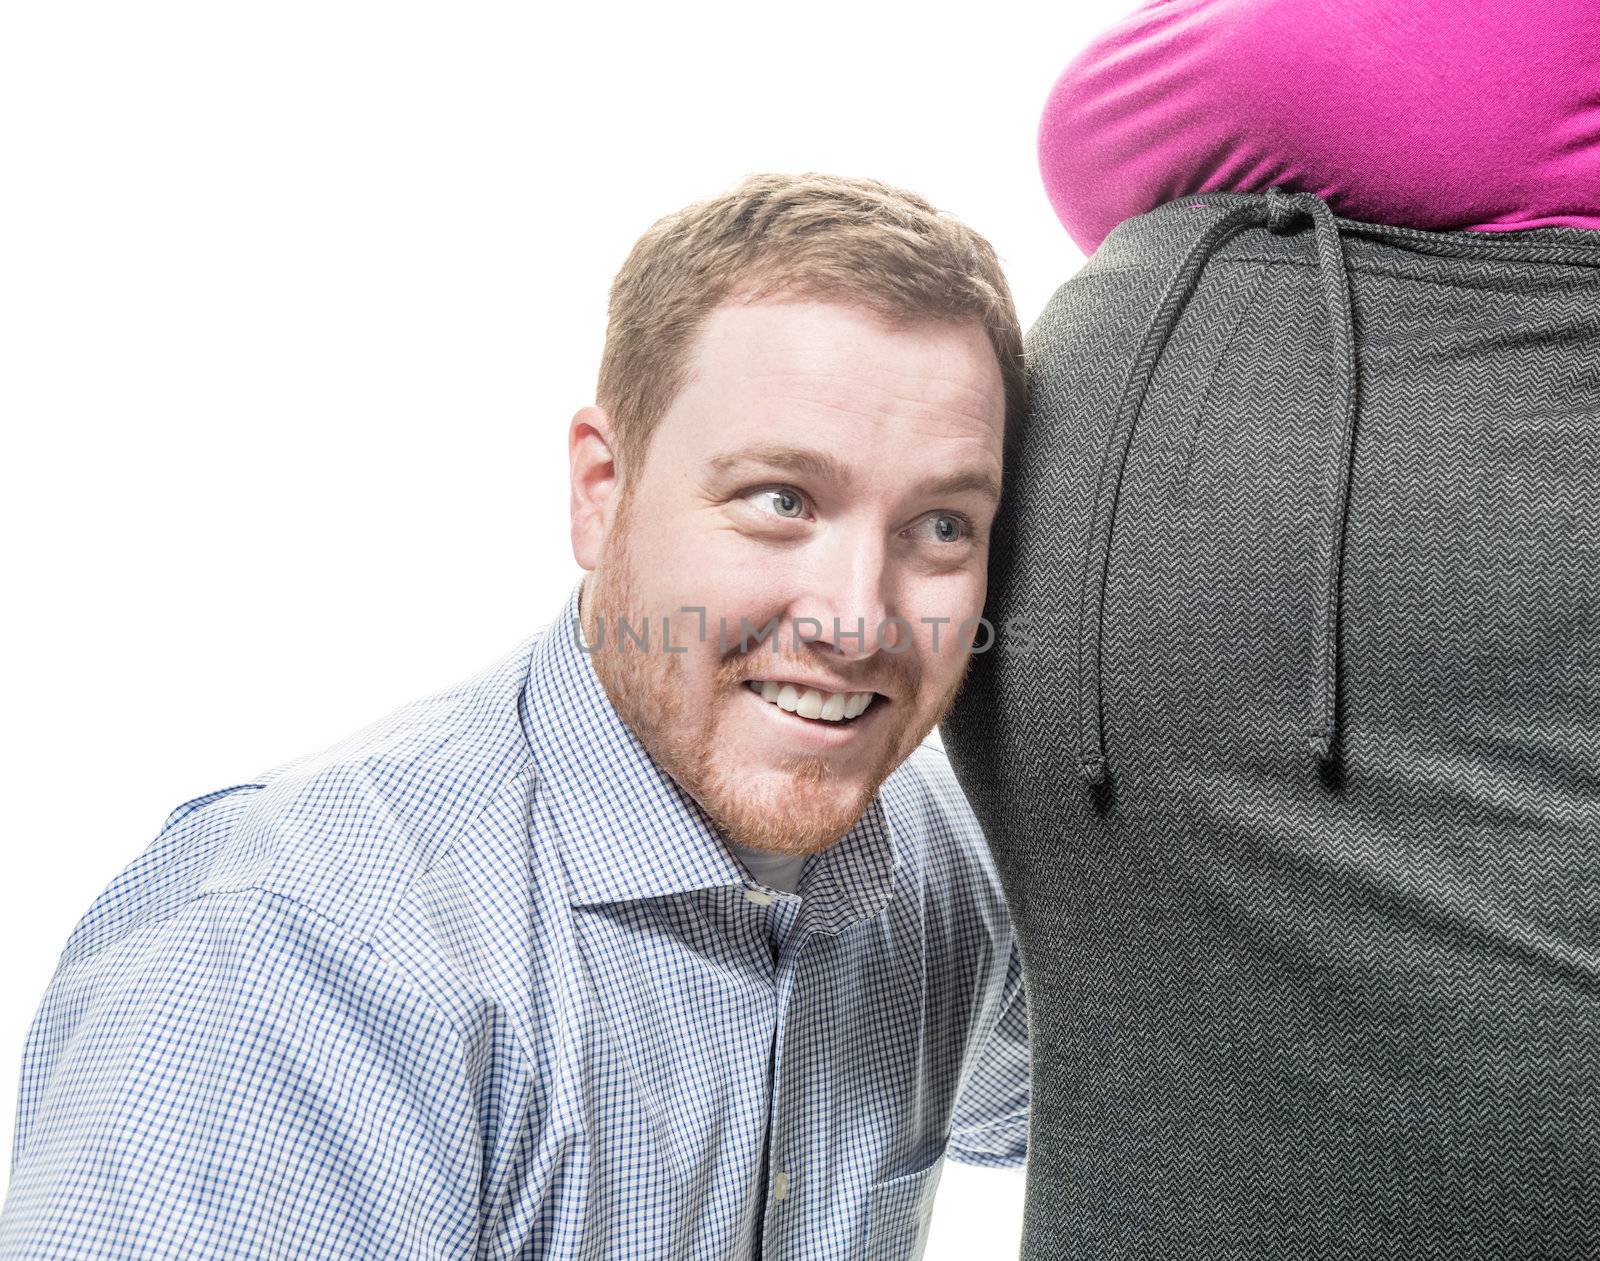 Excited man and belly of pregnant woman, isolated on white background.
